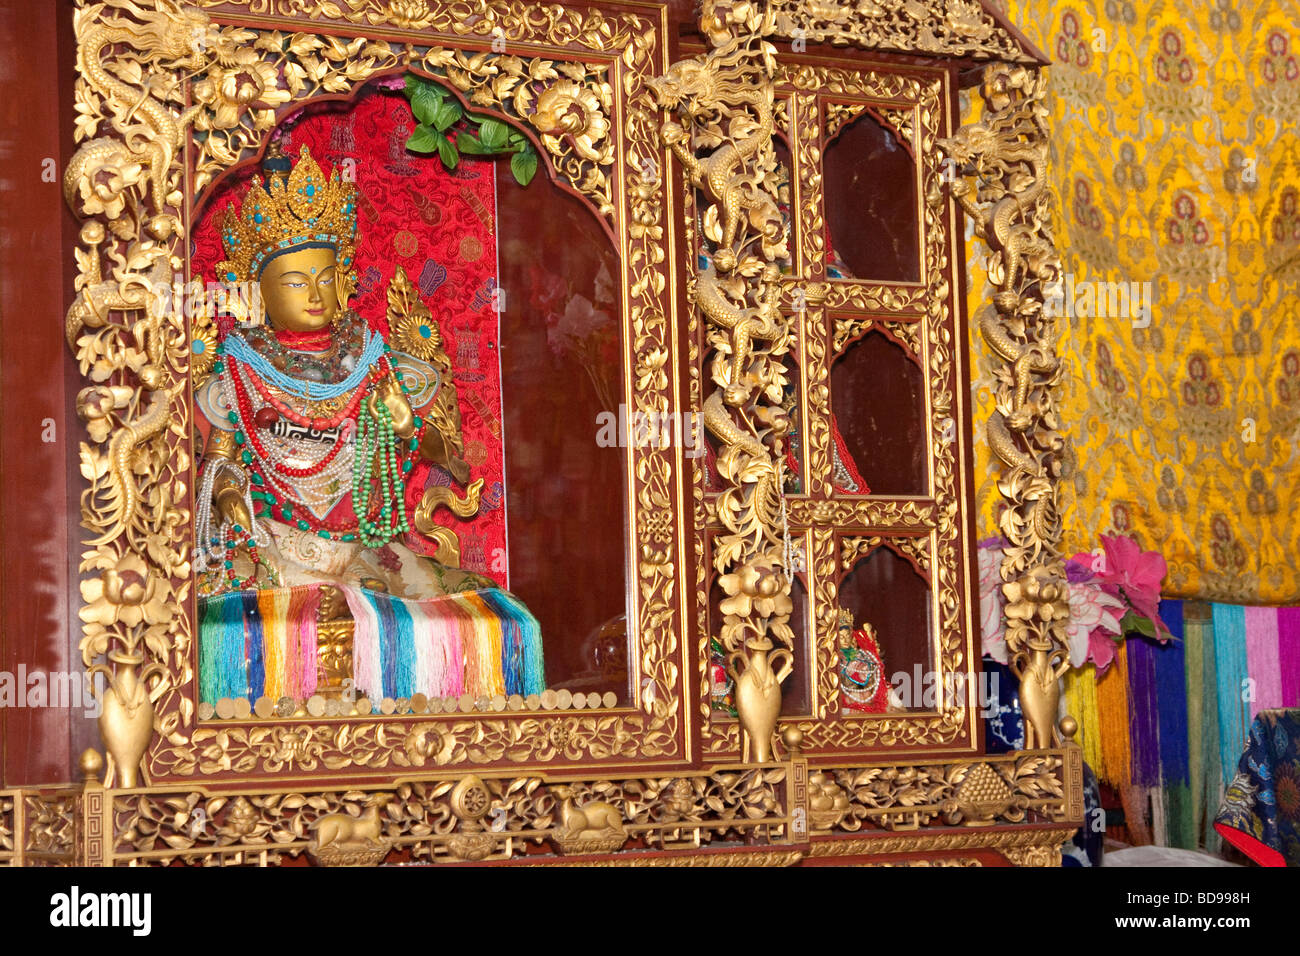 Bodhnath, Nepal. Tassels and Fabric Decorating the inside of the